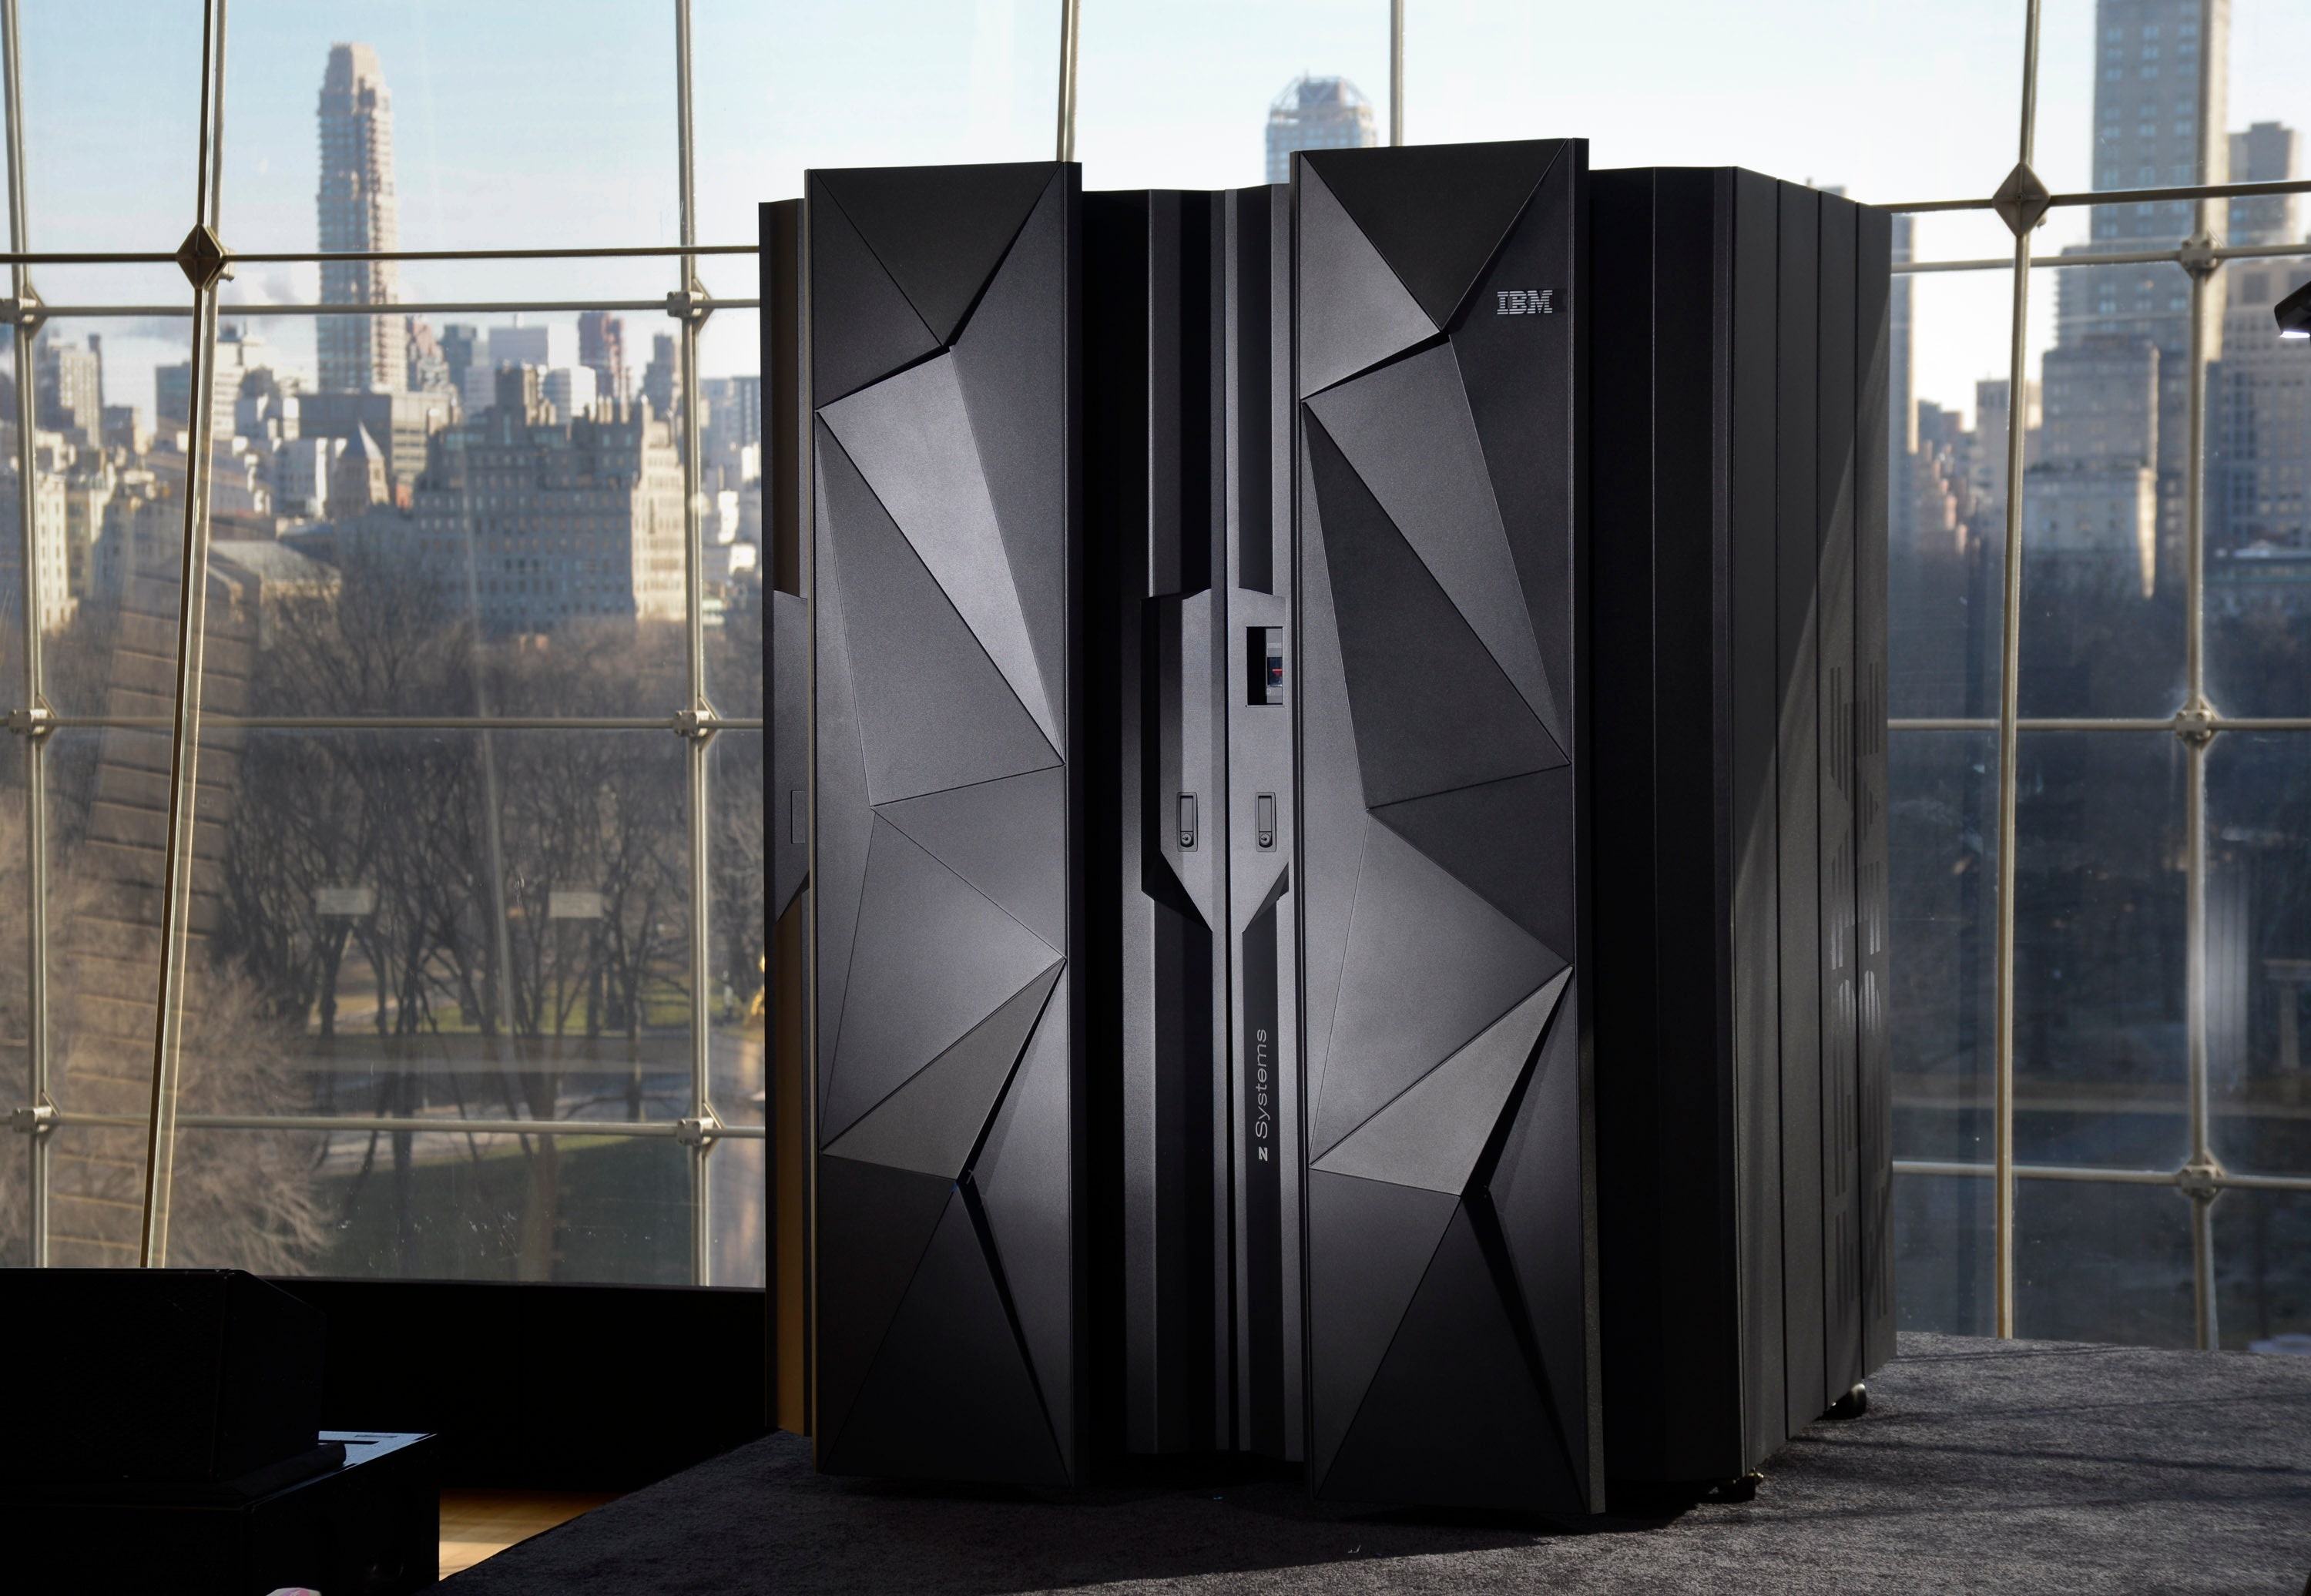 IBM mainframes, wired technology, technological persistence, enduring innovation, 3000x2080 HD Desktop